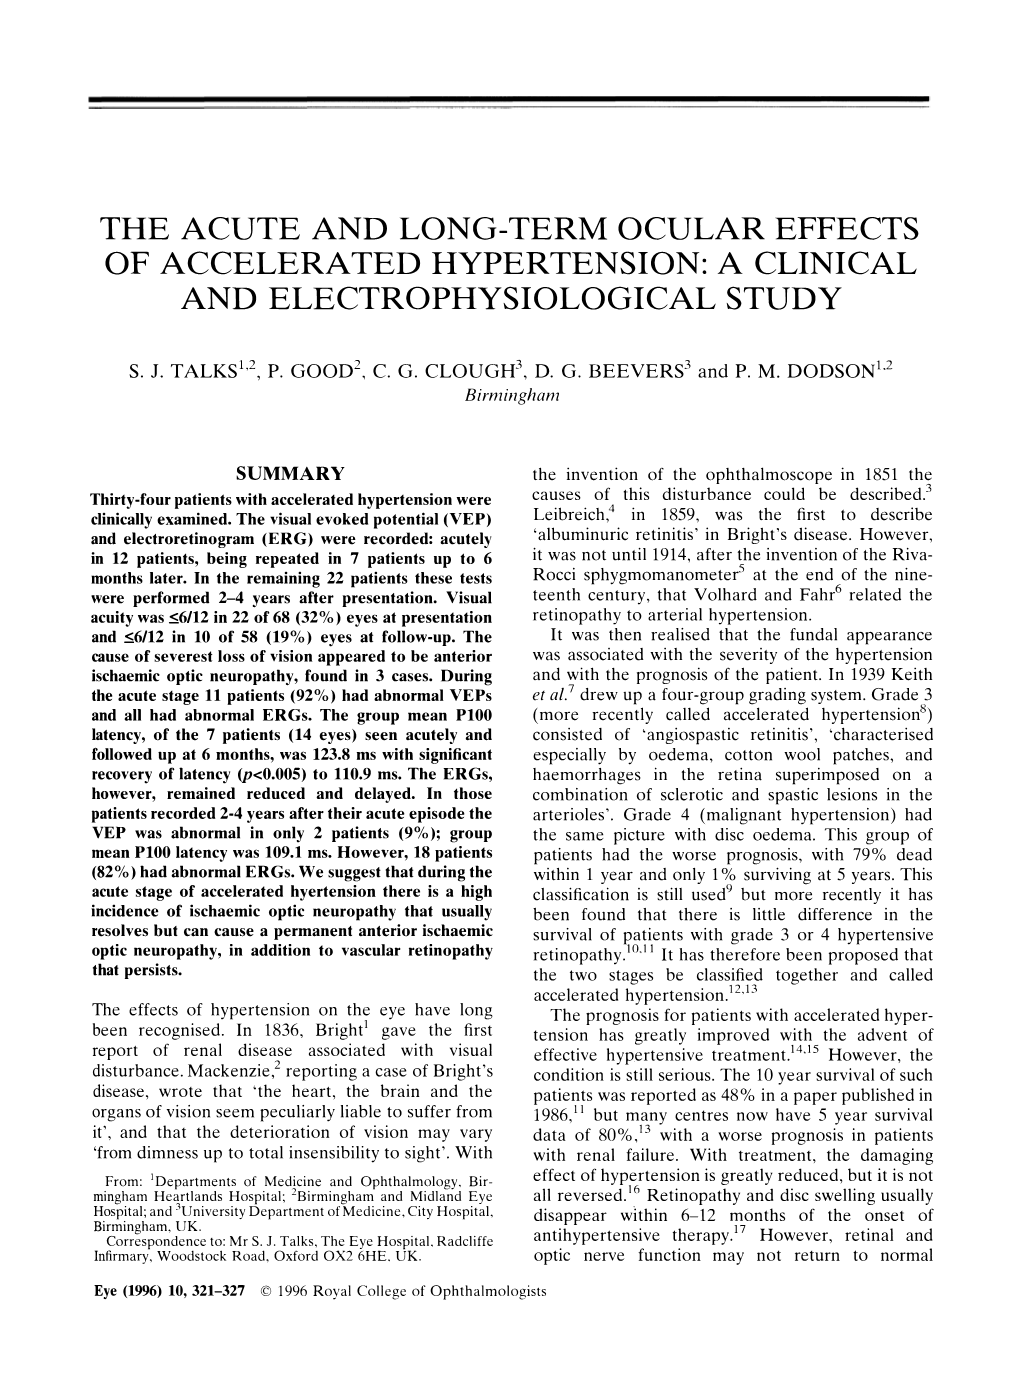 The Acute and Long-Term Ocular Effects of Accelerated Hypertension: a Clinical and Electrophysiological Study